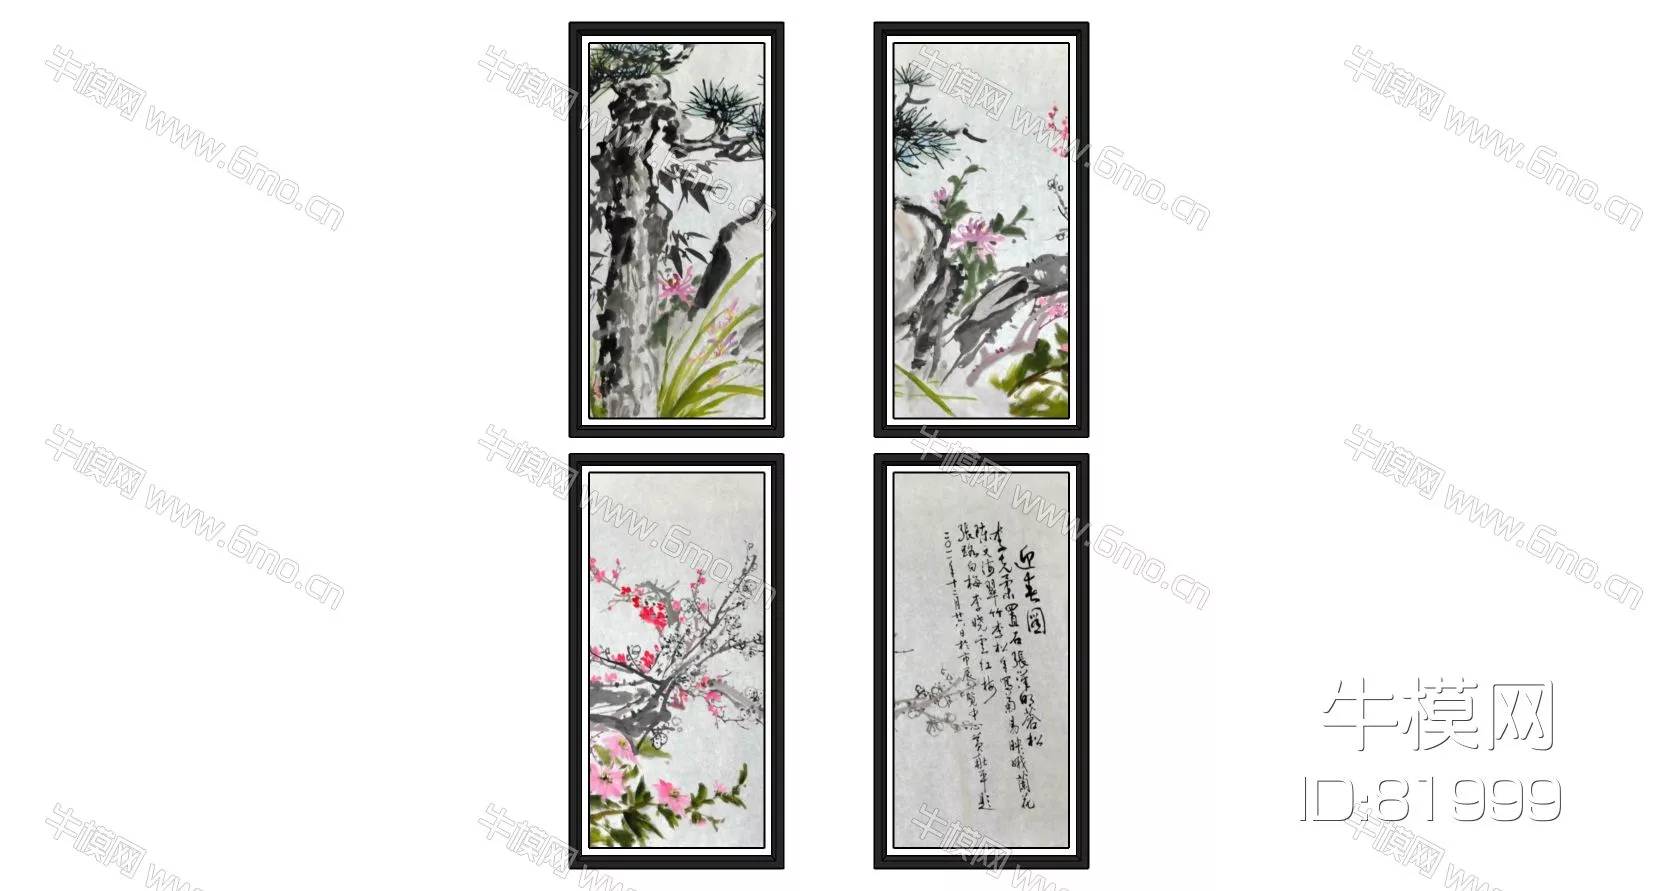 CHINESE PICTURE FRAME - SKETCHUP 3D MODEL - ENSCAPE - 81999